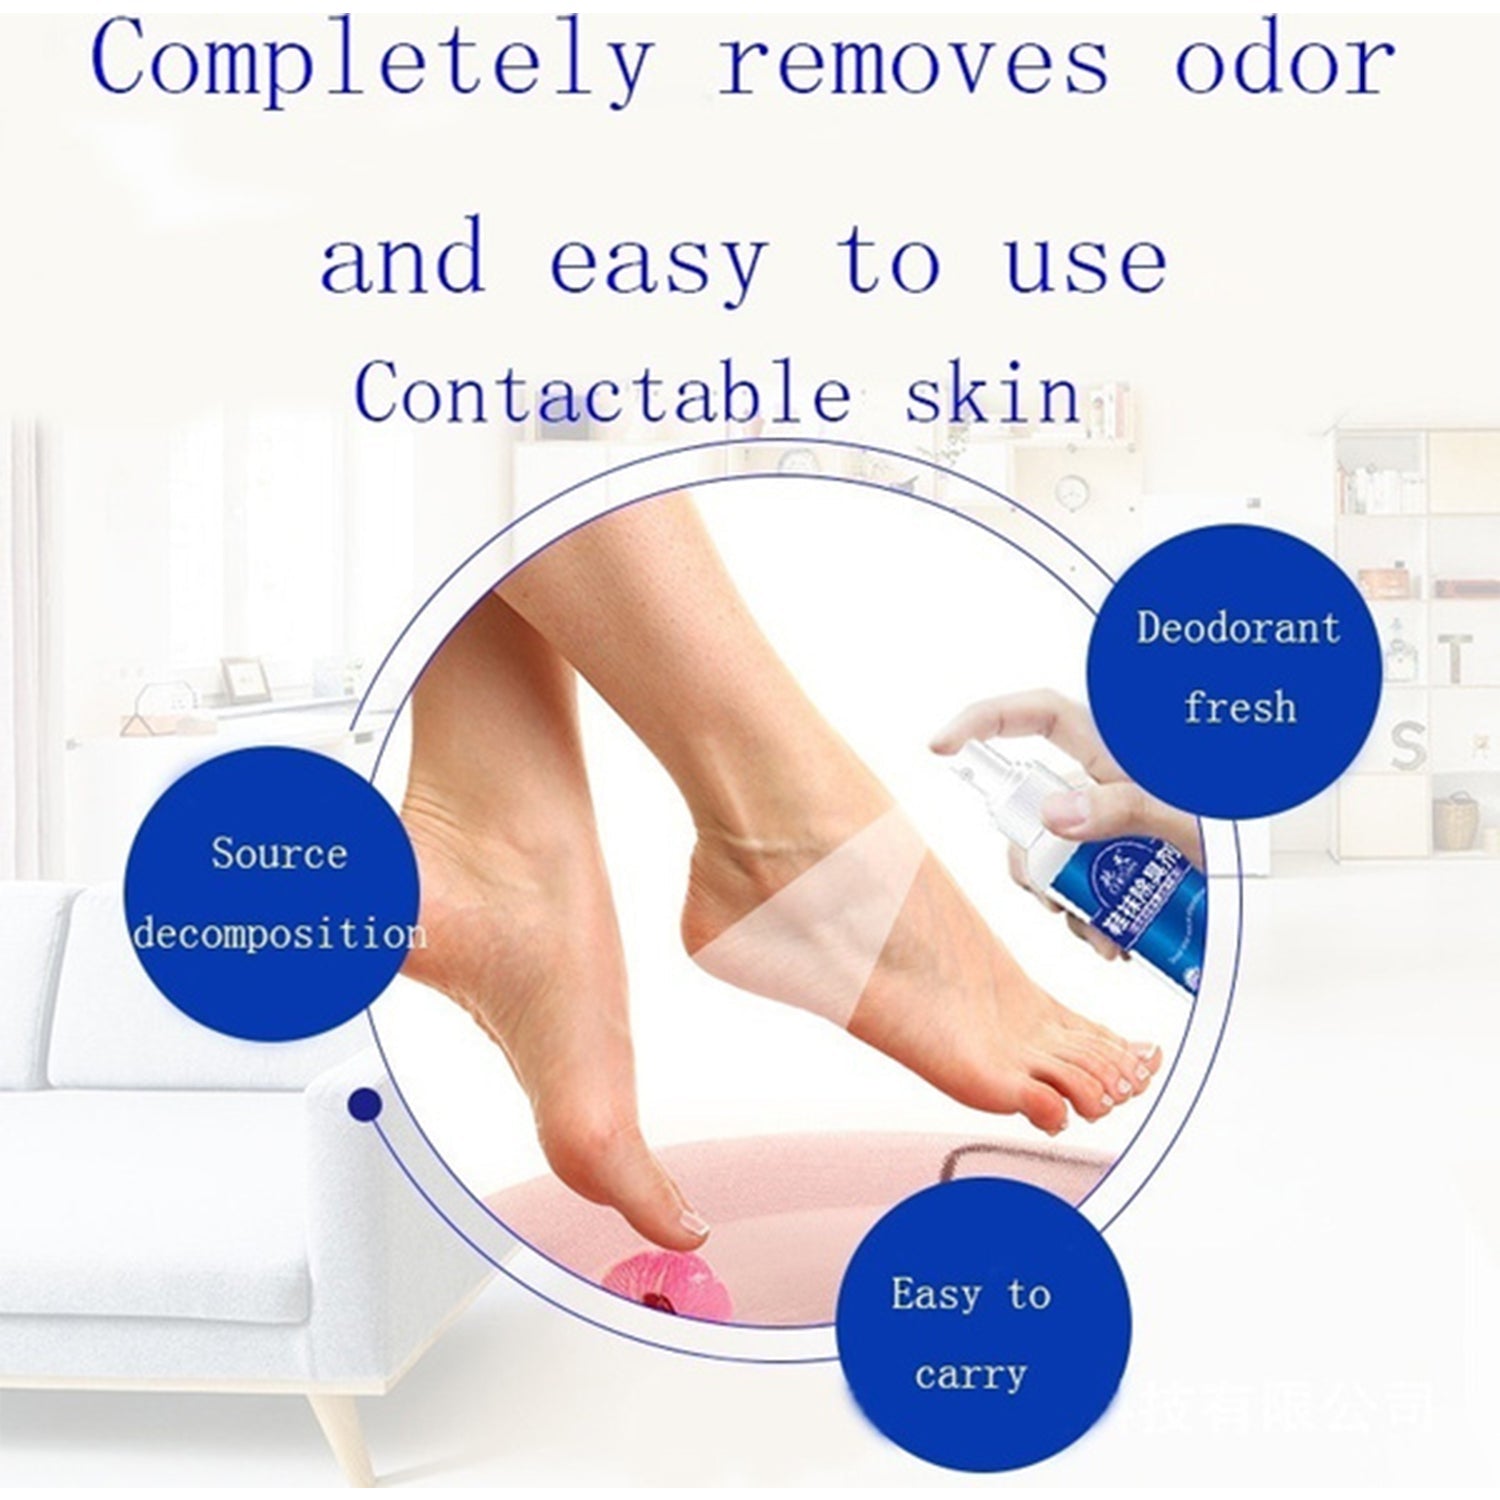 6153 Shoes Stink Freshener widely used as a stink remover and making them fresh as new purposes.